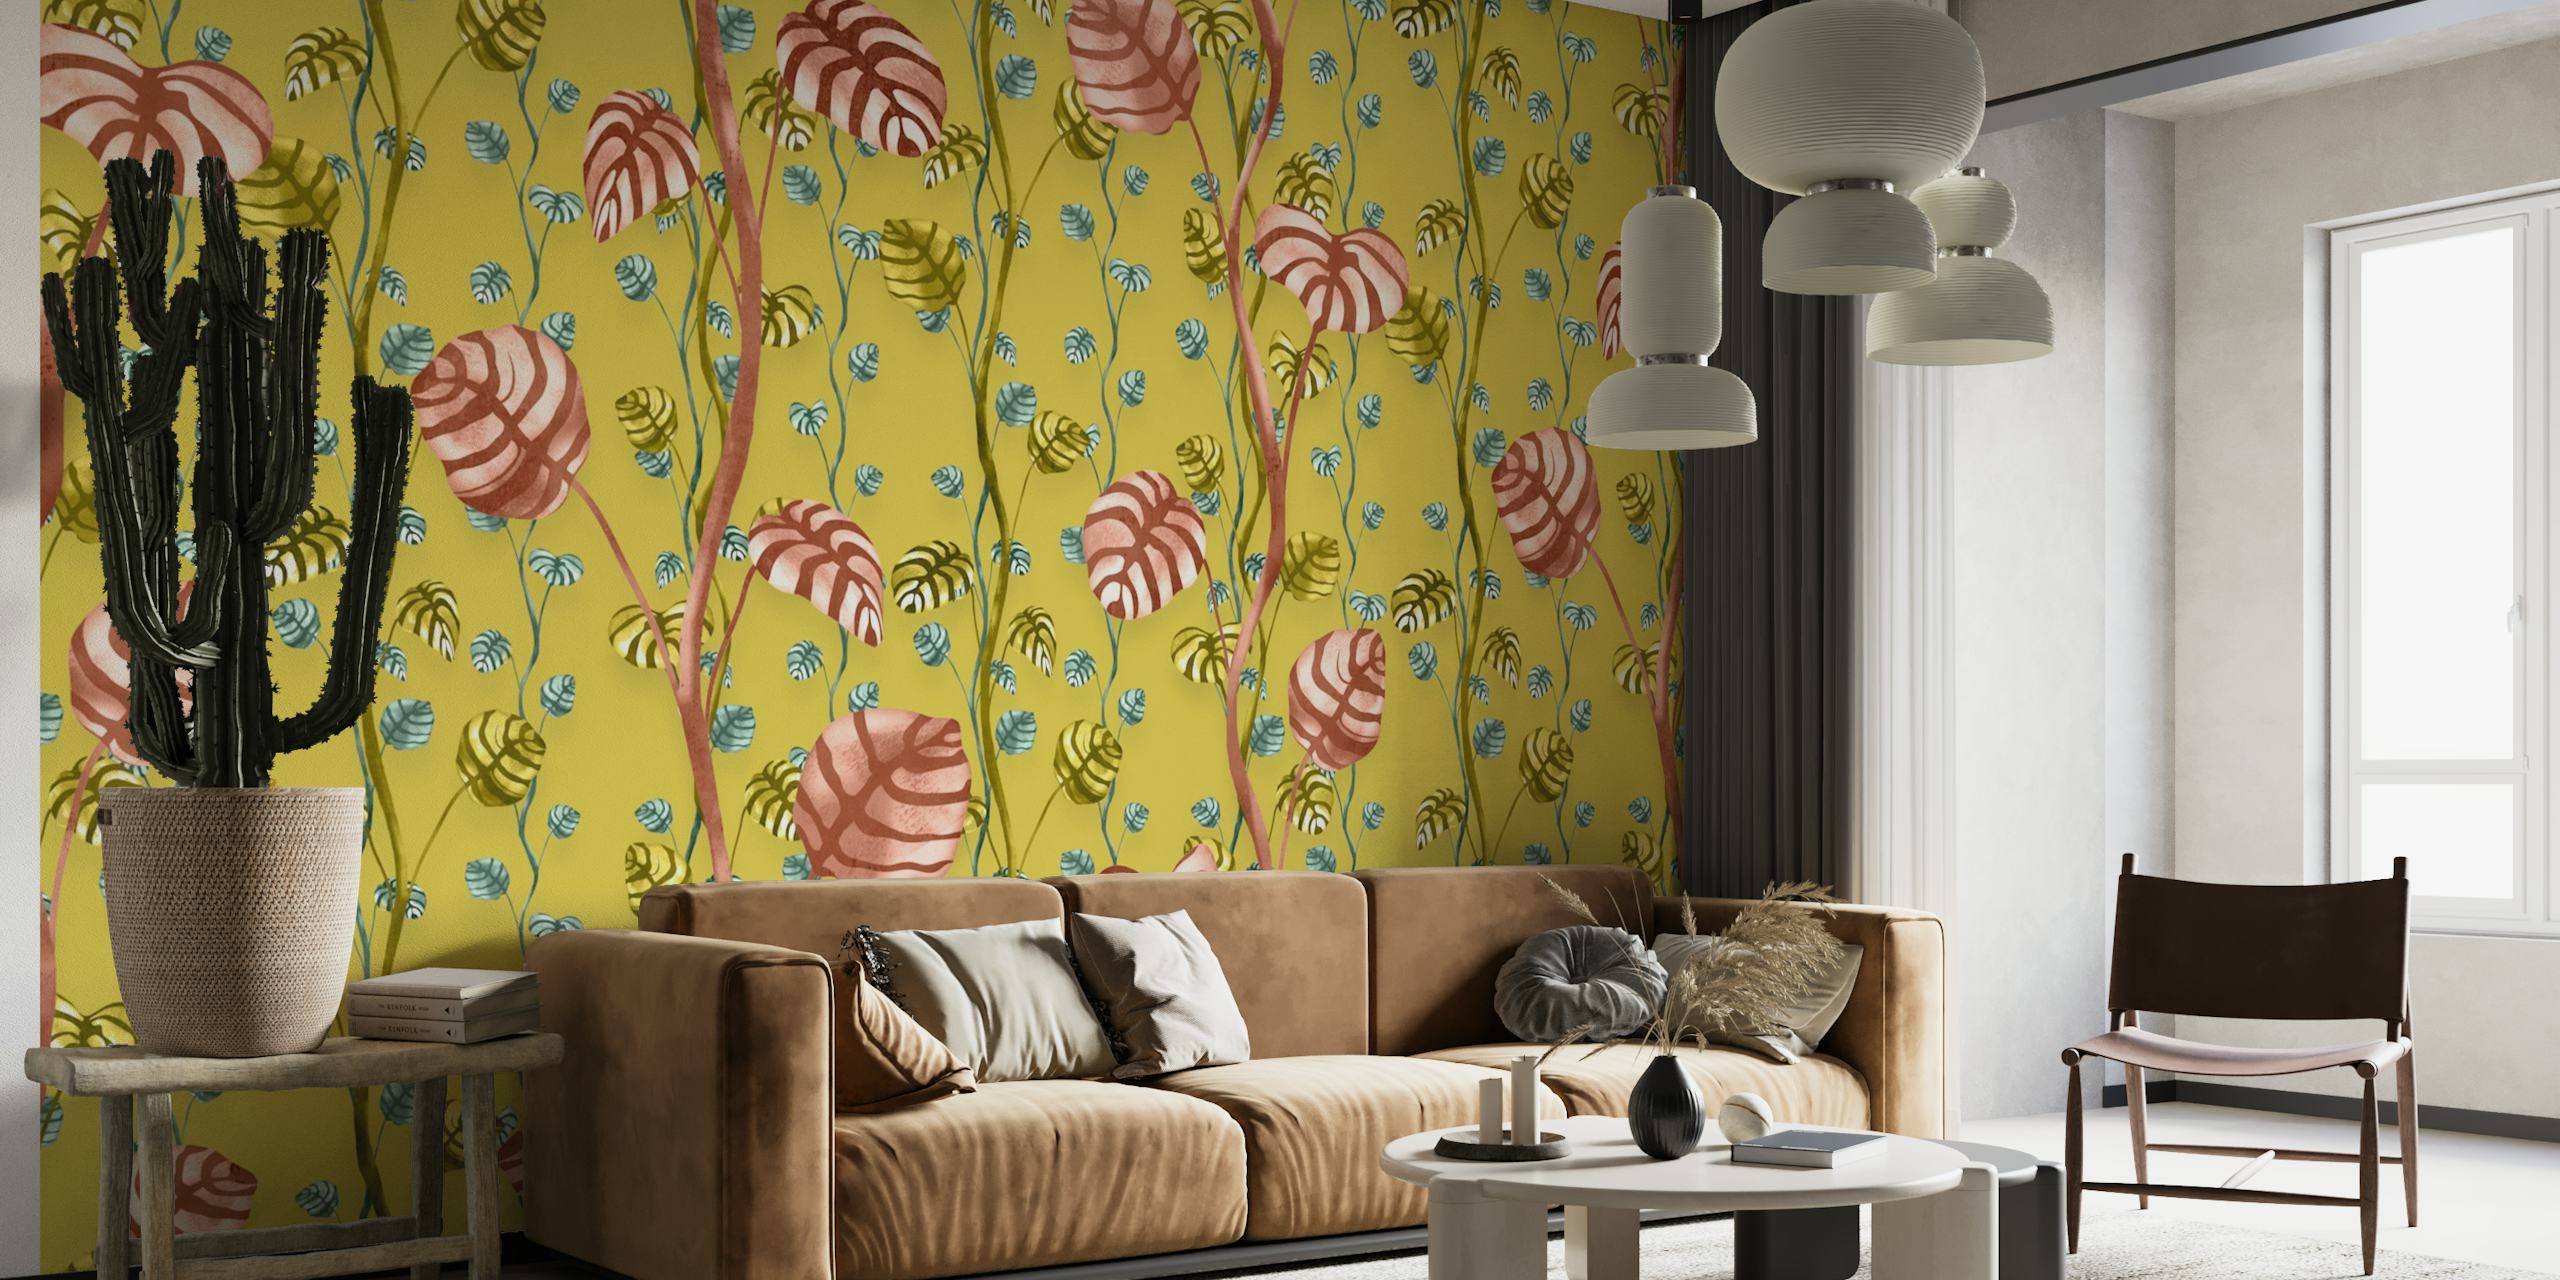 Mustard-colored wallpaper with a climbing plants pattern featuring pink, green, and white colors.